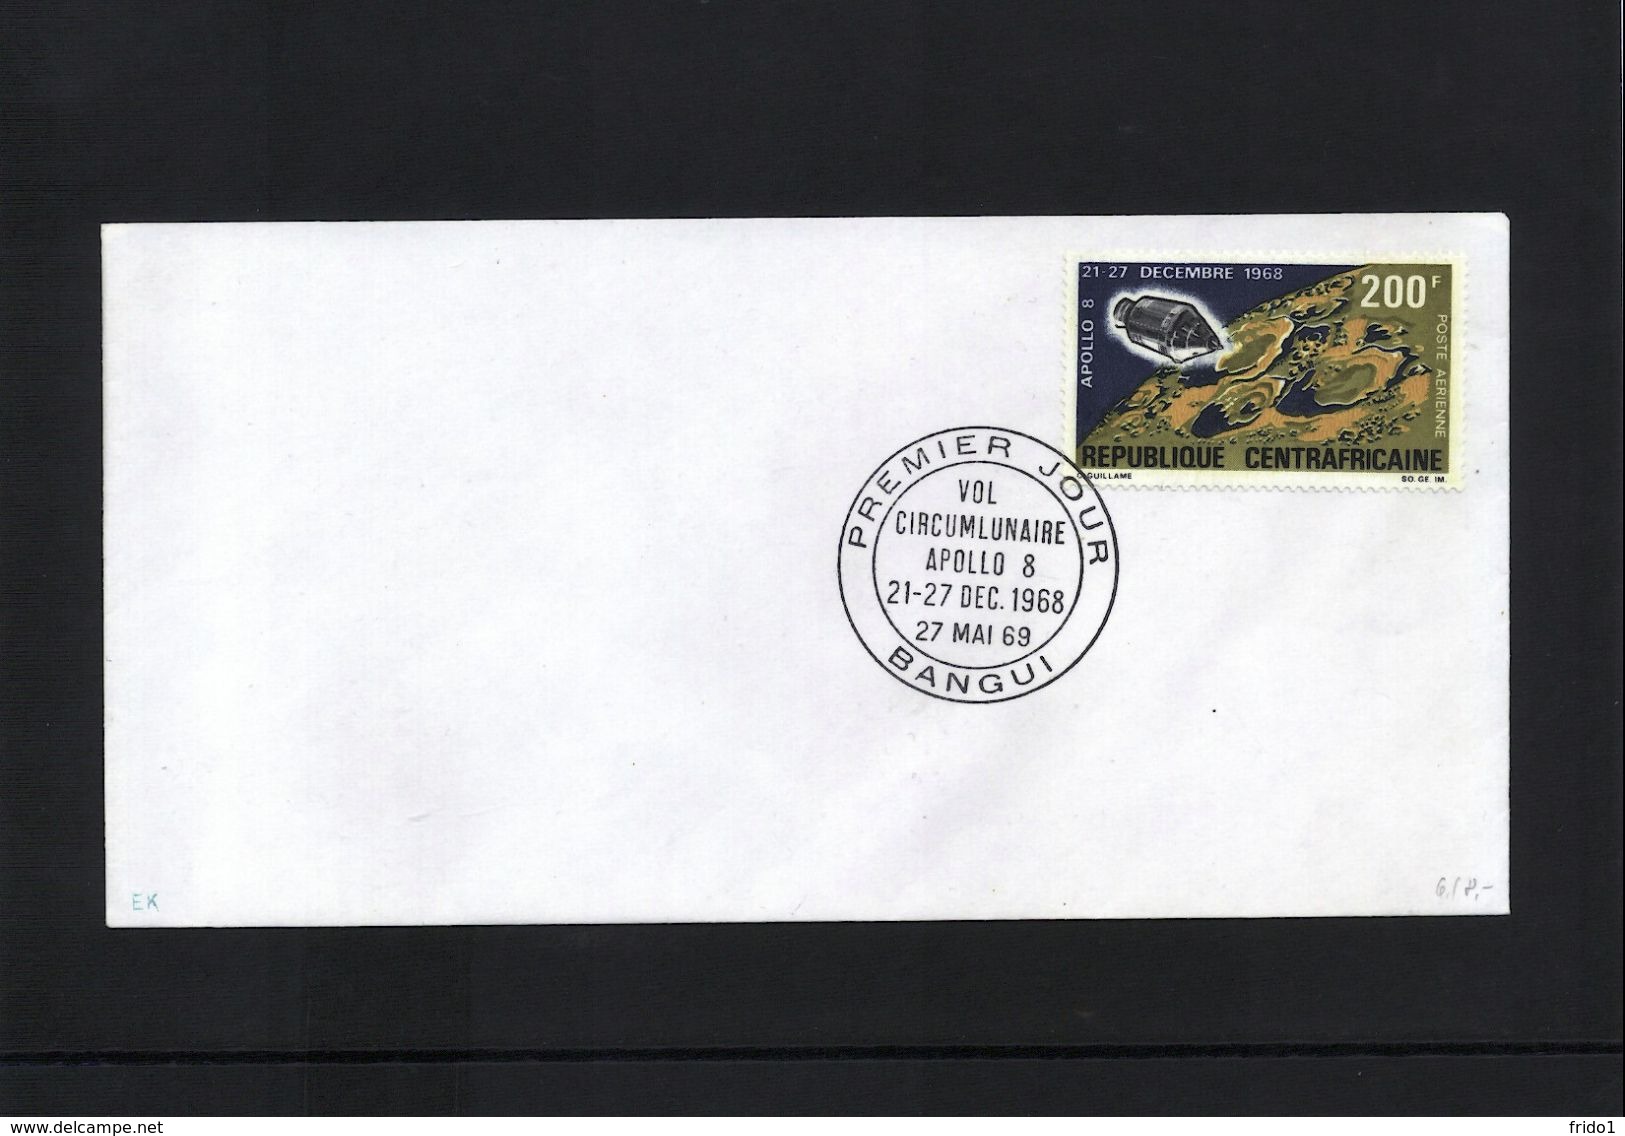 Central African Republic Raumfahrt / Space  - Apollo 8 FDC - Africa